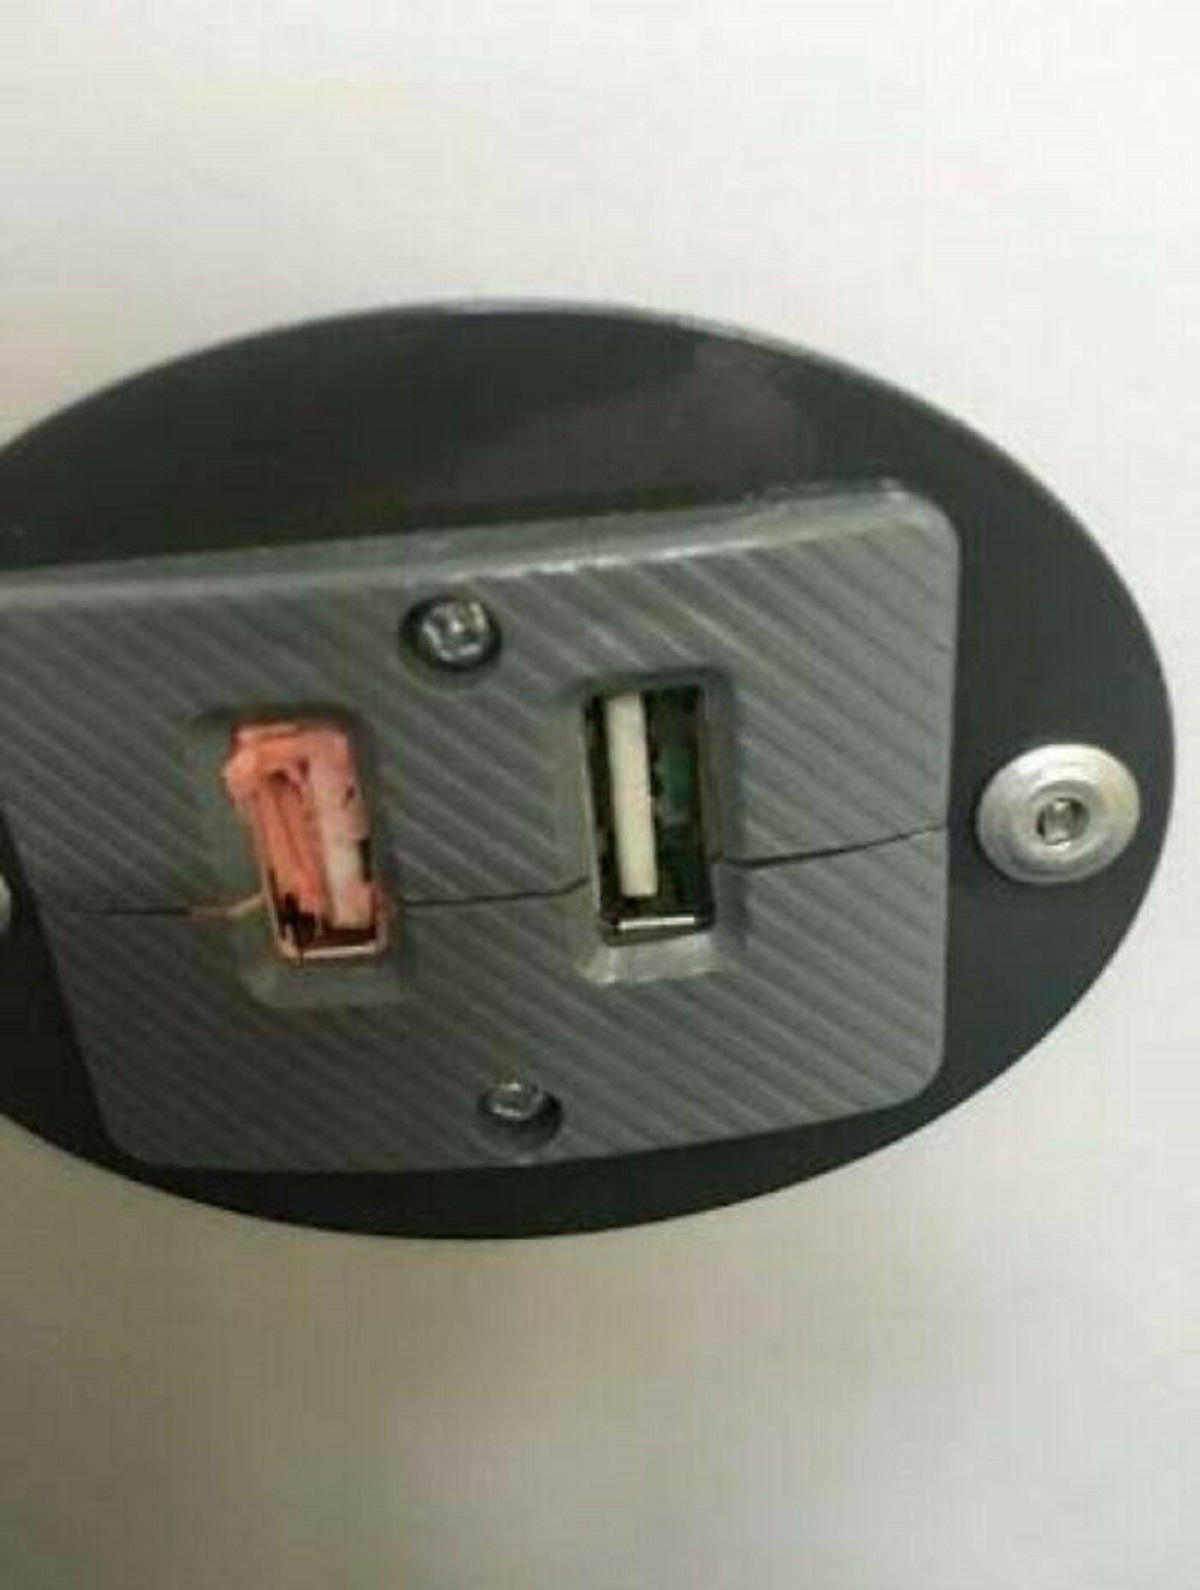 "People Who Put Gum On The USB Ports Of Public Transport"